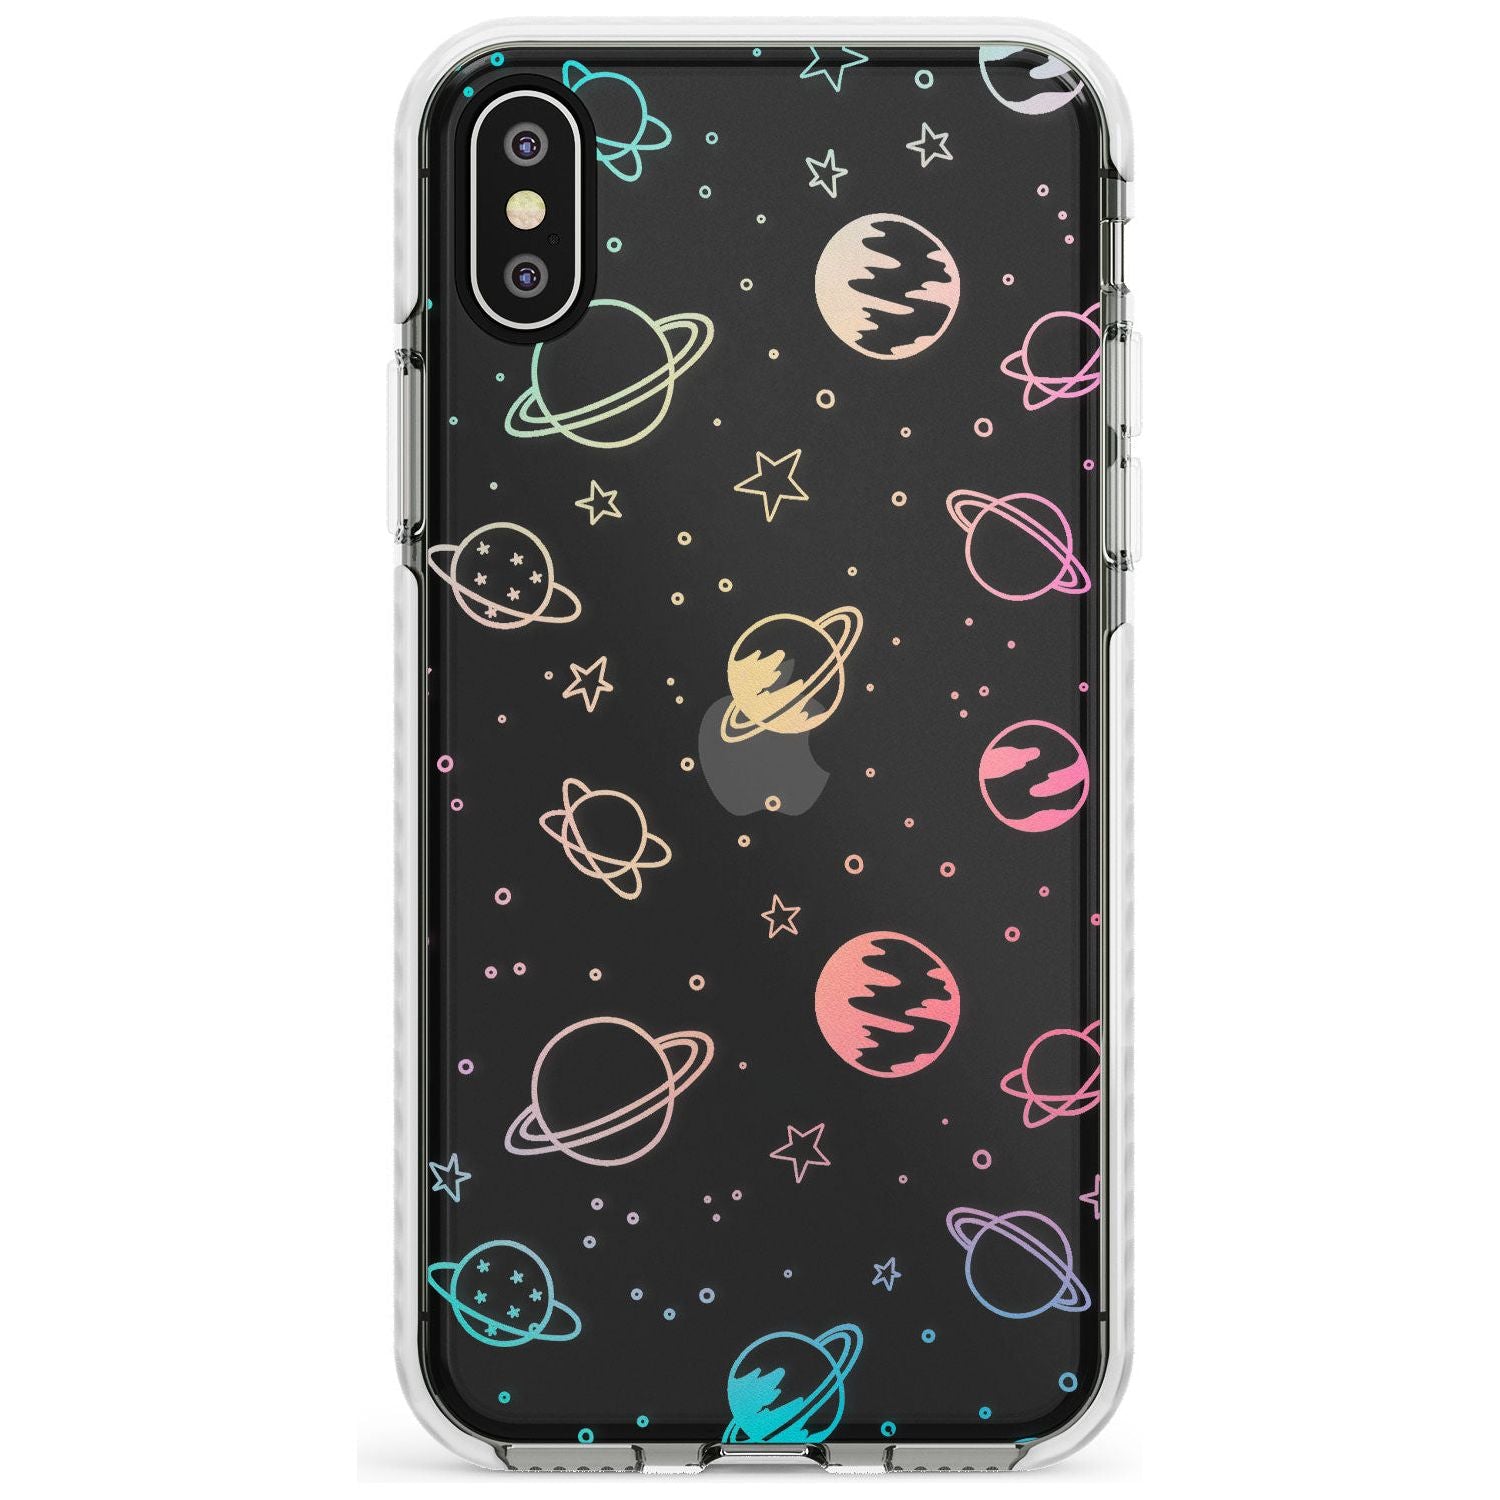 Outer Space Outlines: Pastels on Clear Slim TPU Phone Case Warehouse X XS Max XR